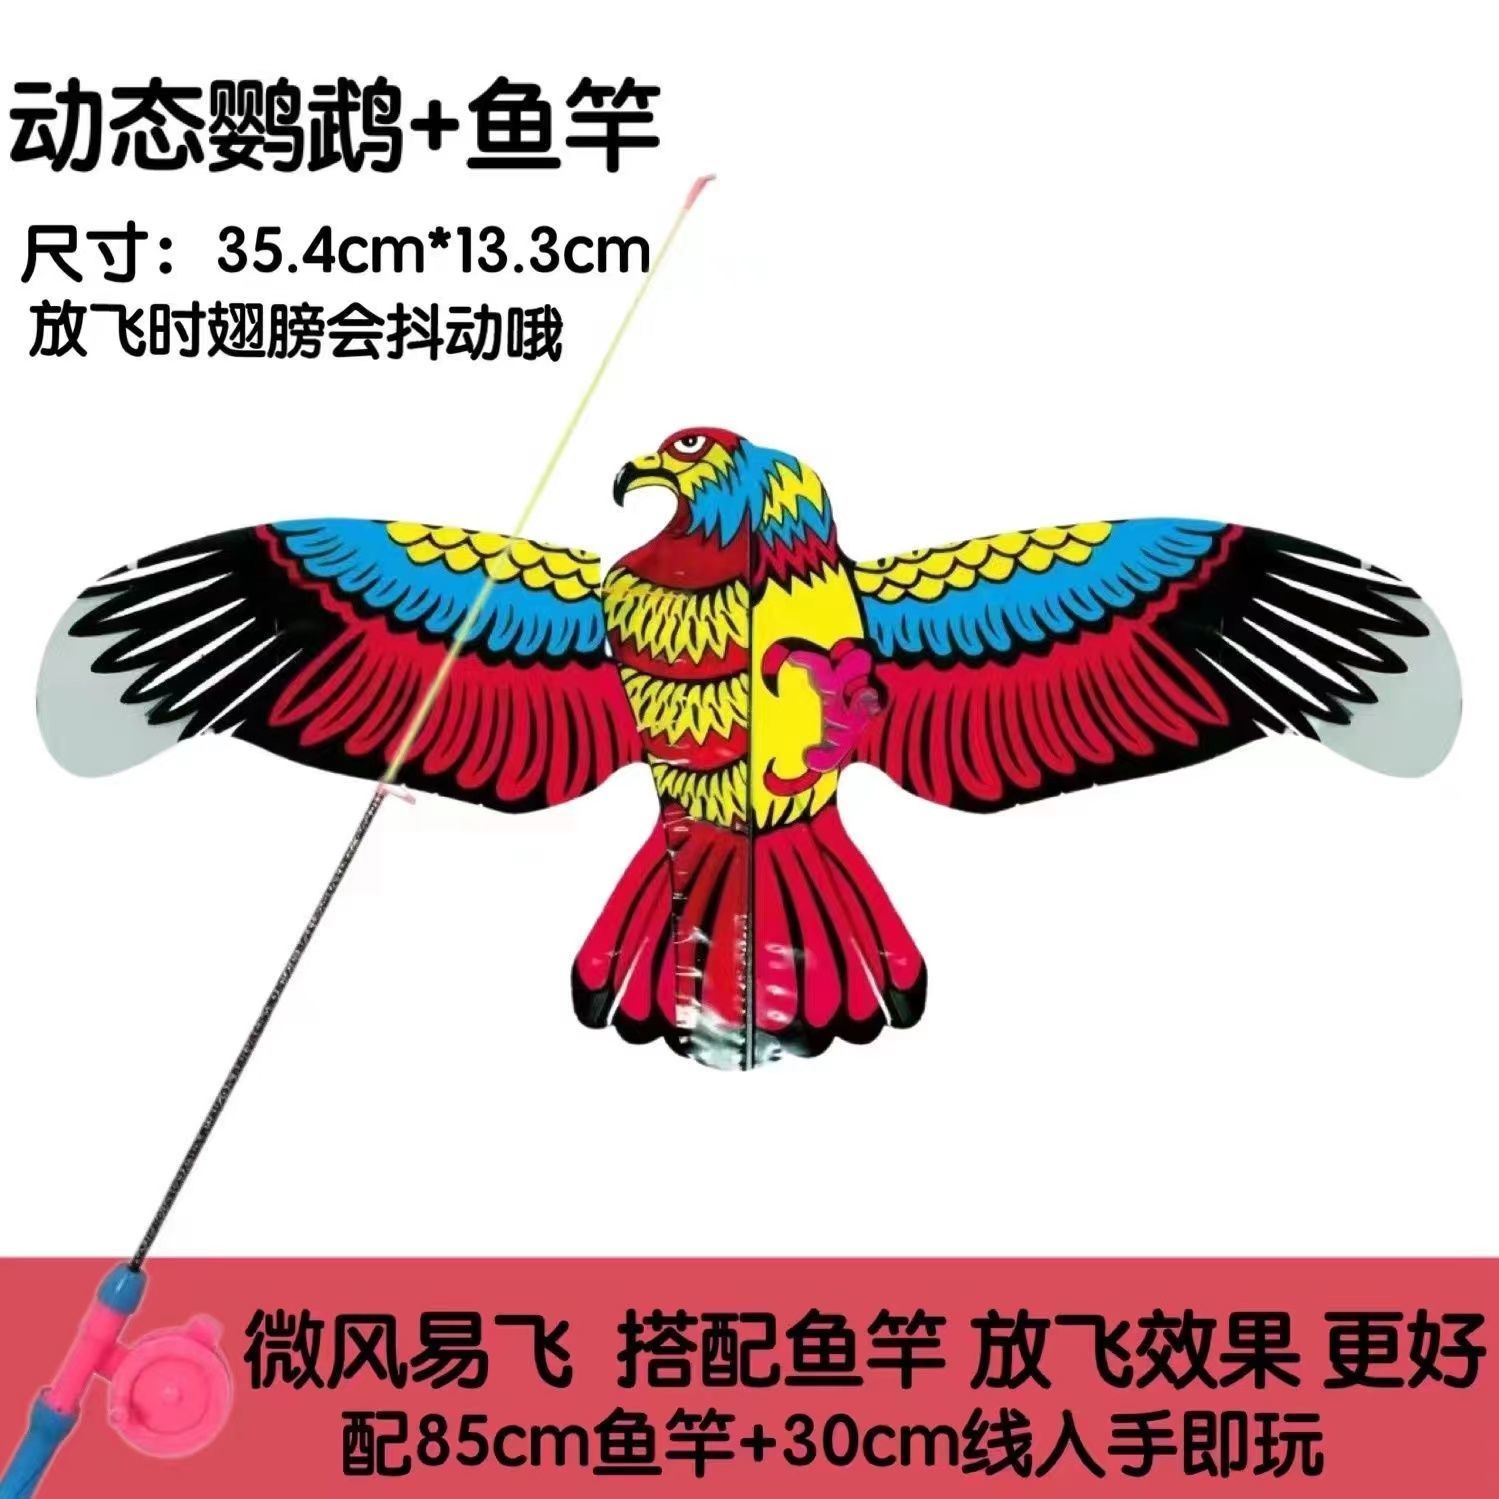 Fishing Rod Kite Dynamic Kite Mini Eagle Swallow Butterfly Children's Hand-Held Breeze Easy to Fly String Plastic Small Kite